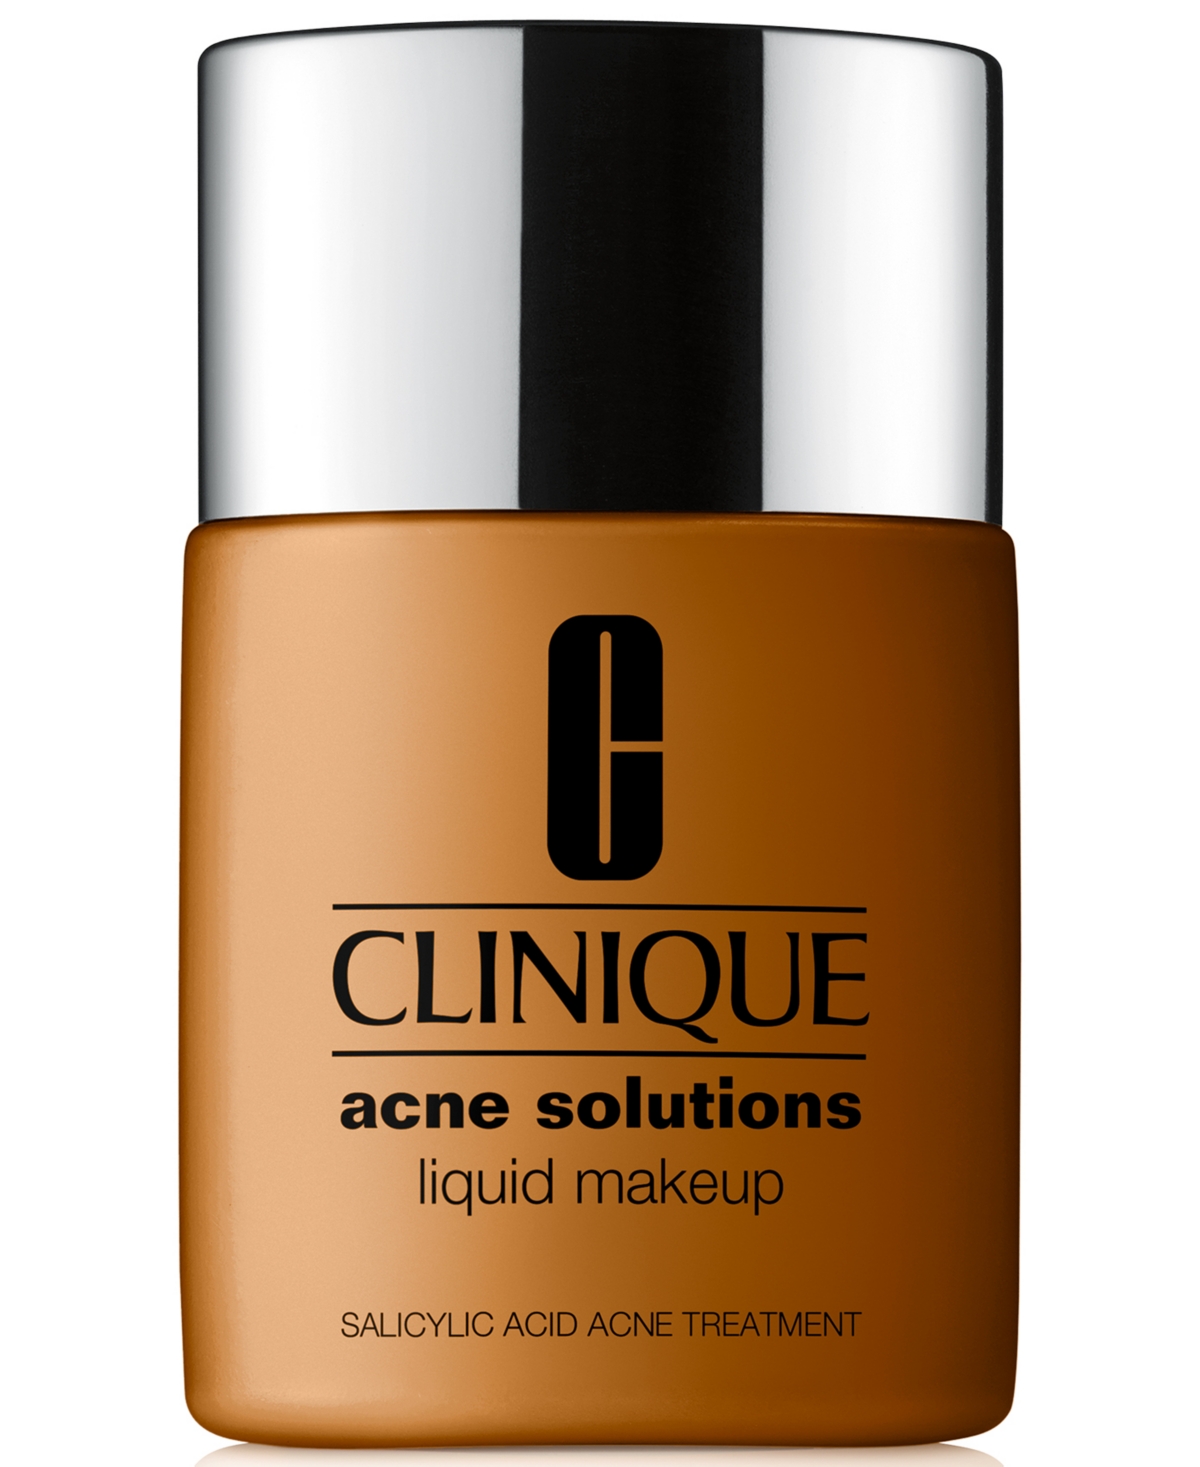 Clinique Acne Solutions Liquid Makeup Foundation, 1 Oz. In Ginger